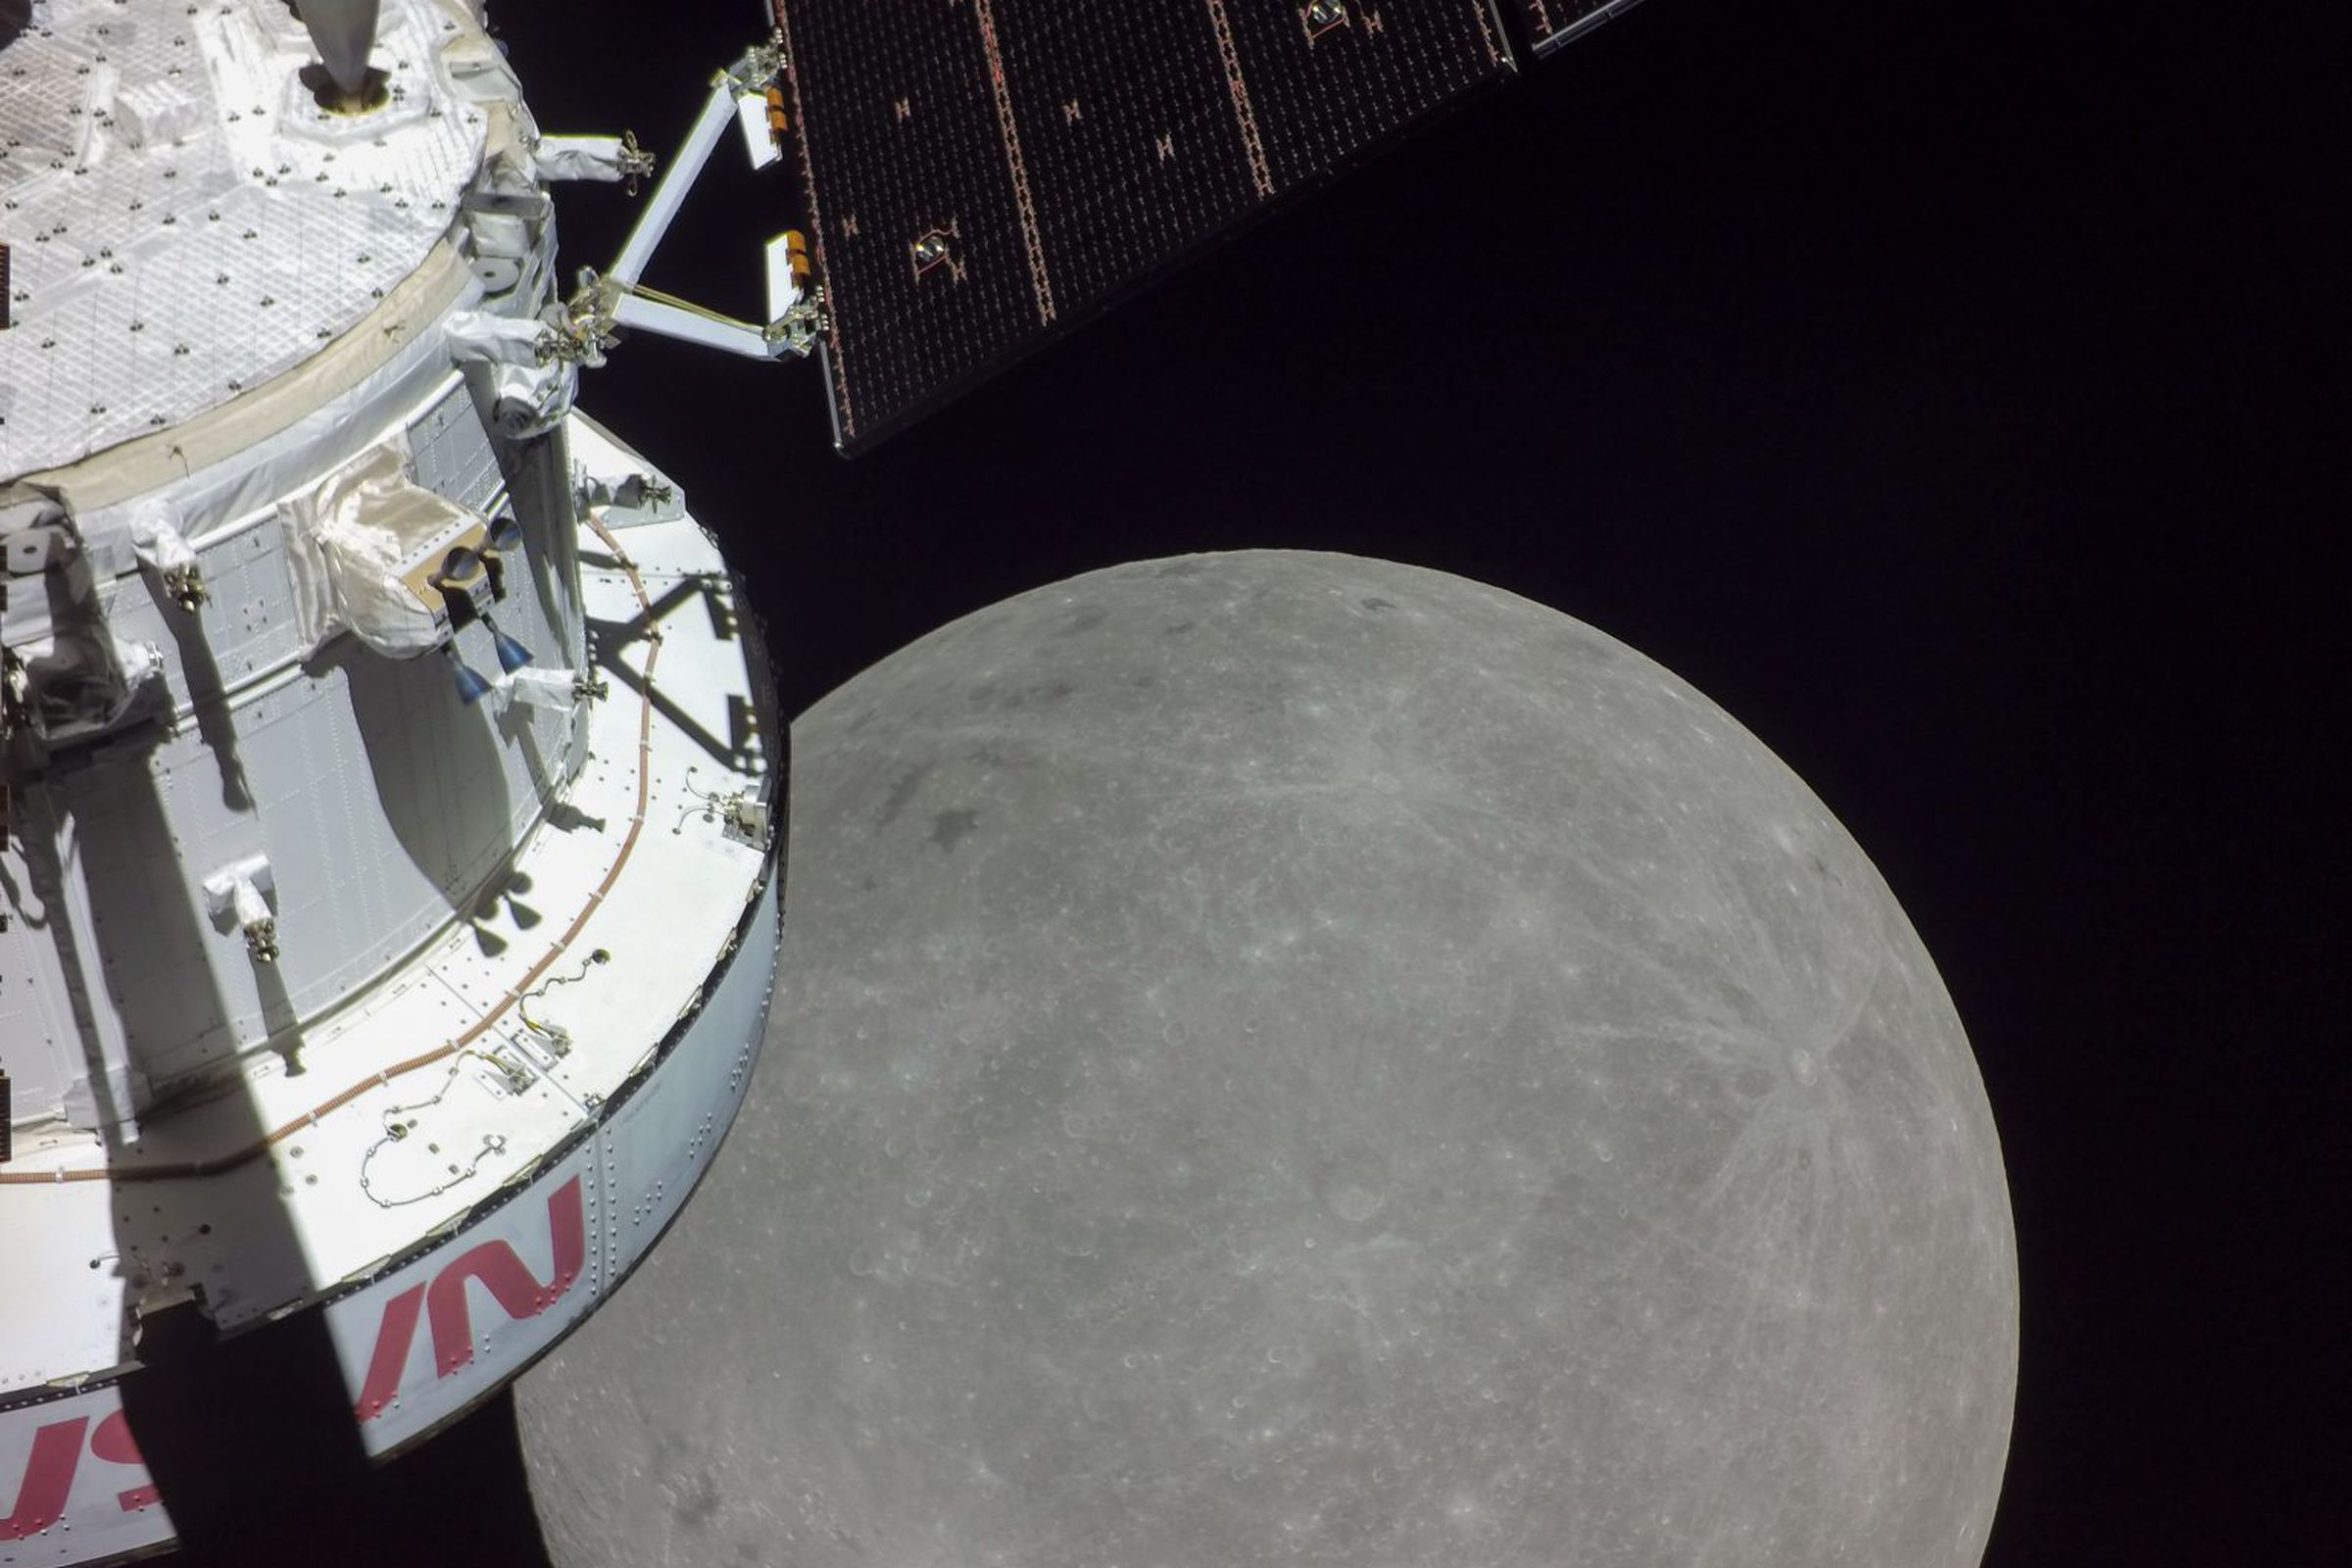 A white spacecraft with NASA’s logo in red is on the left with the disc of the moon in the center.